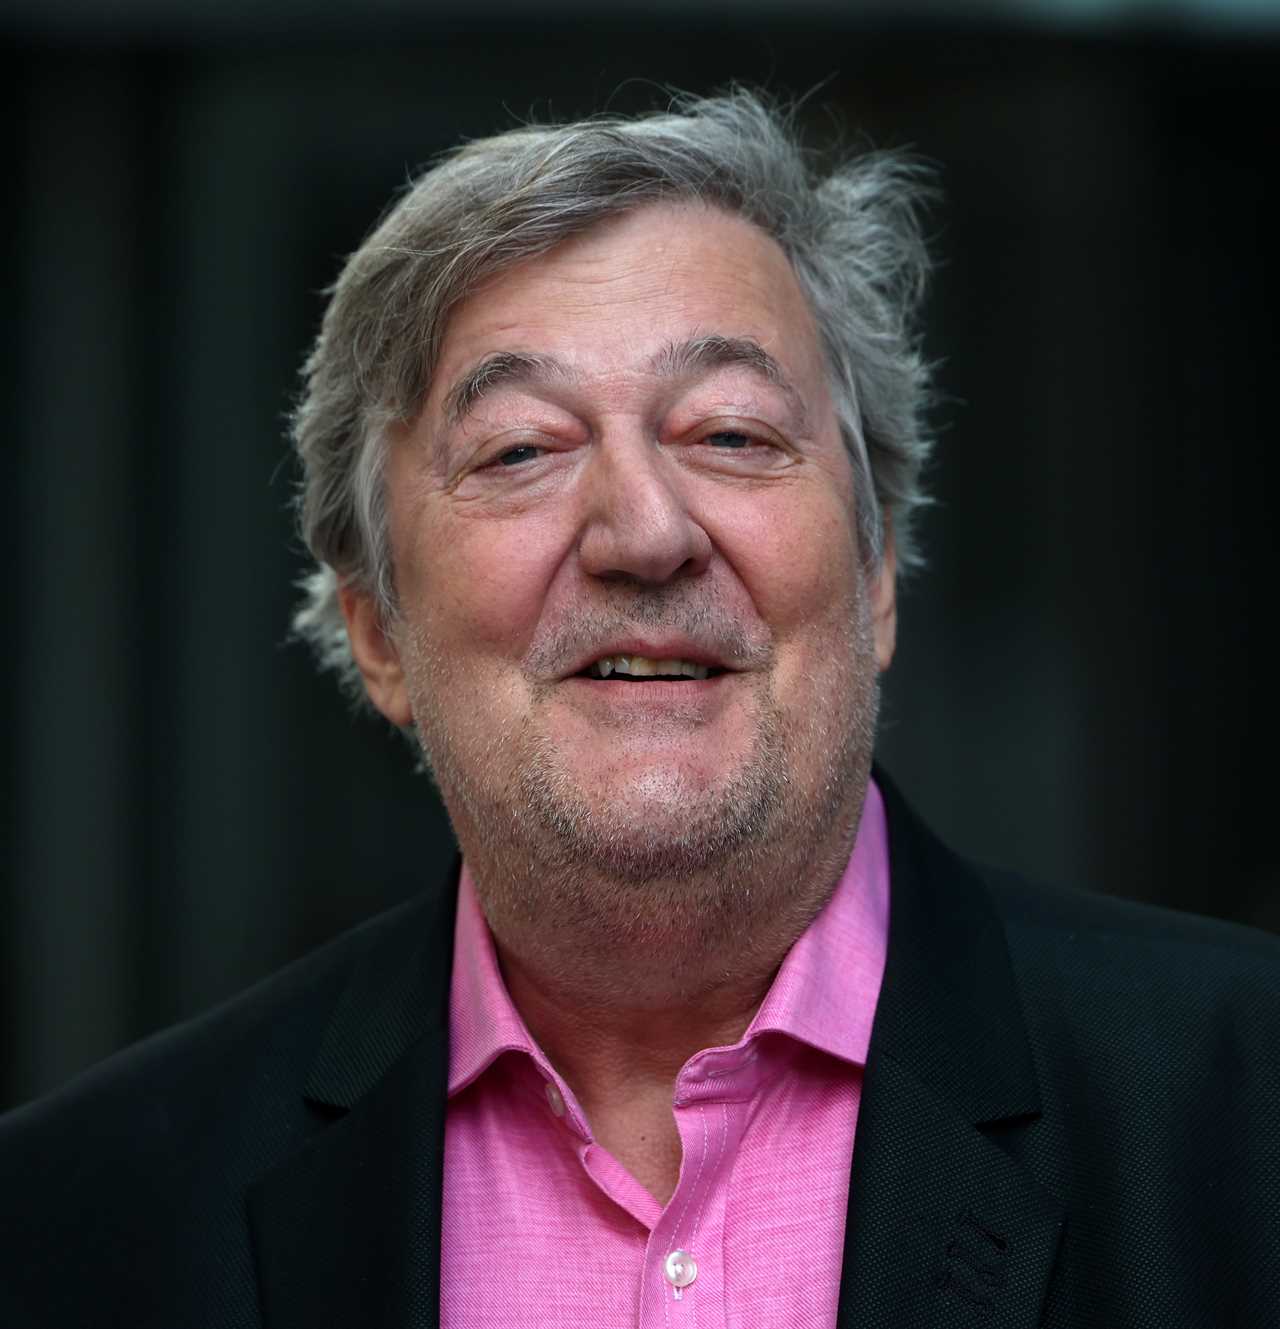 Stephen Fry-backed campaign leads to surge in men checking prostate cancer risk